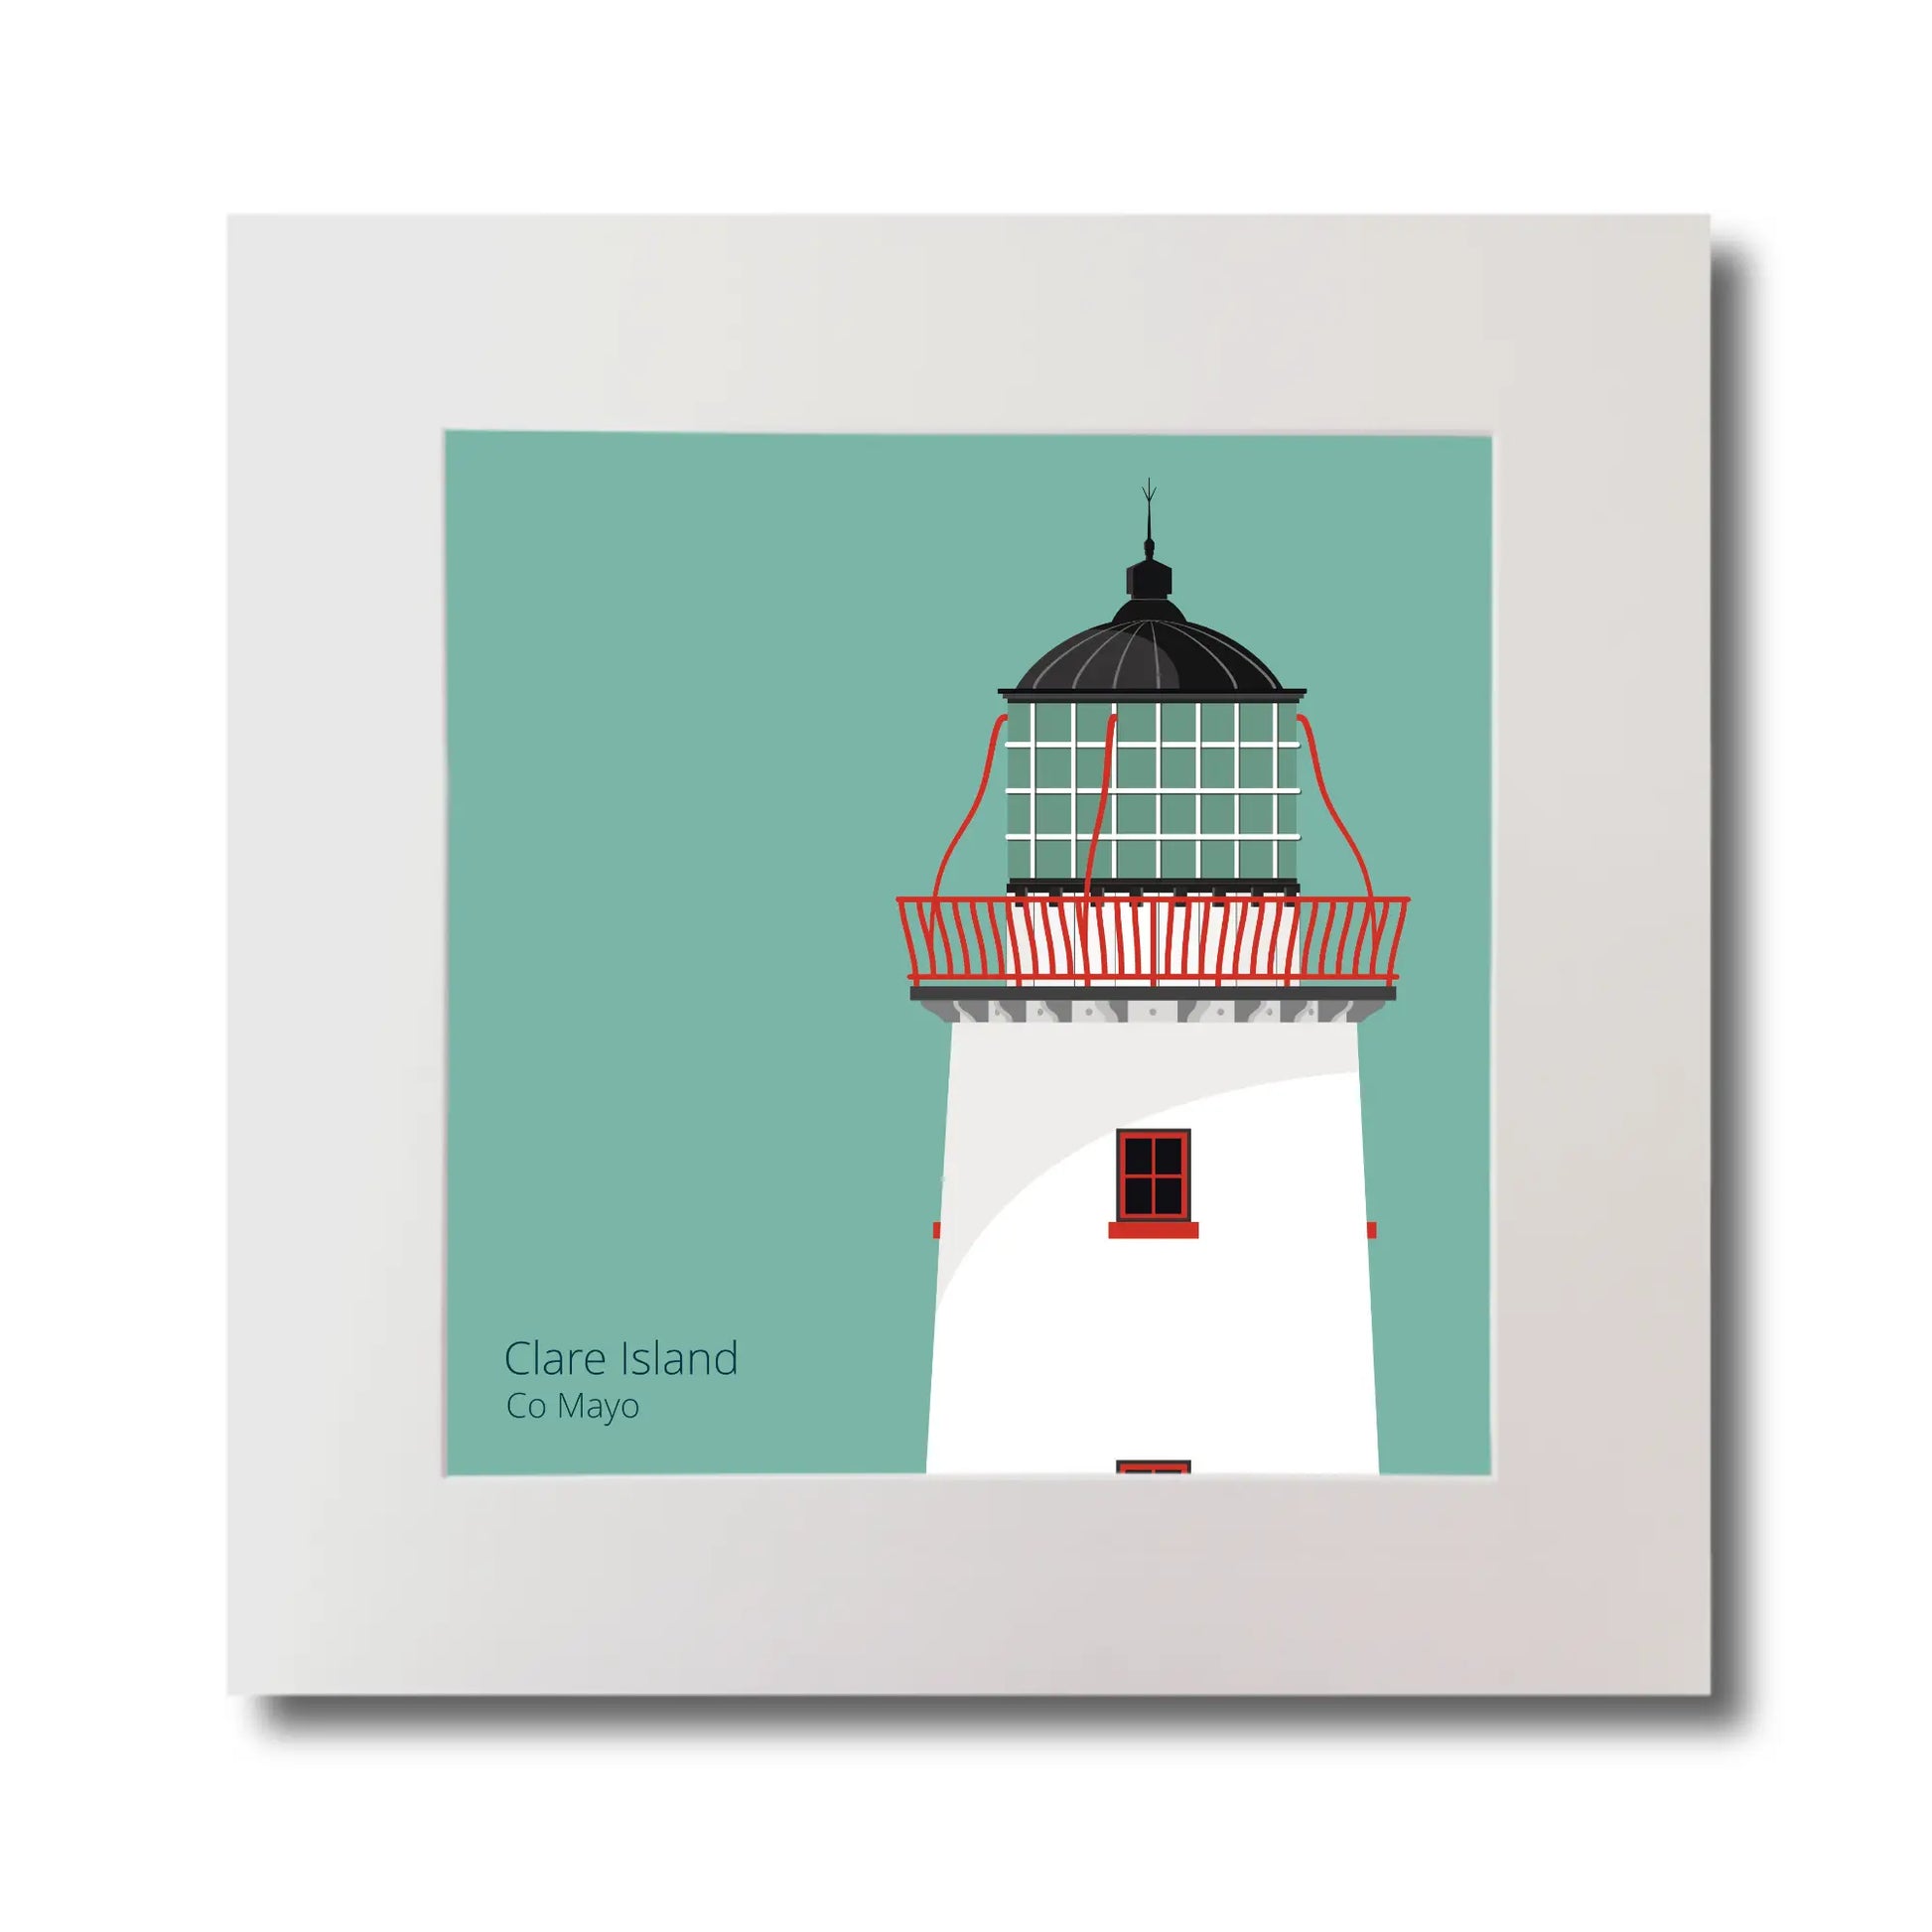 Illustration of Clare Island lighthouse on an ocean green background, mounted and measuring 30x30cm.